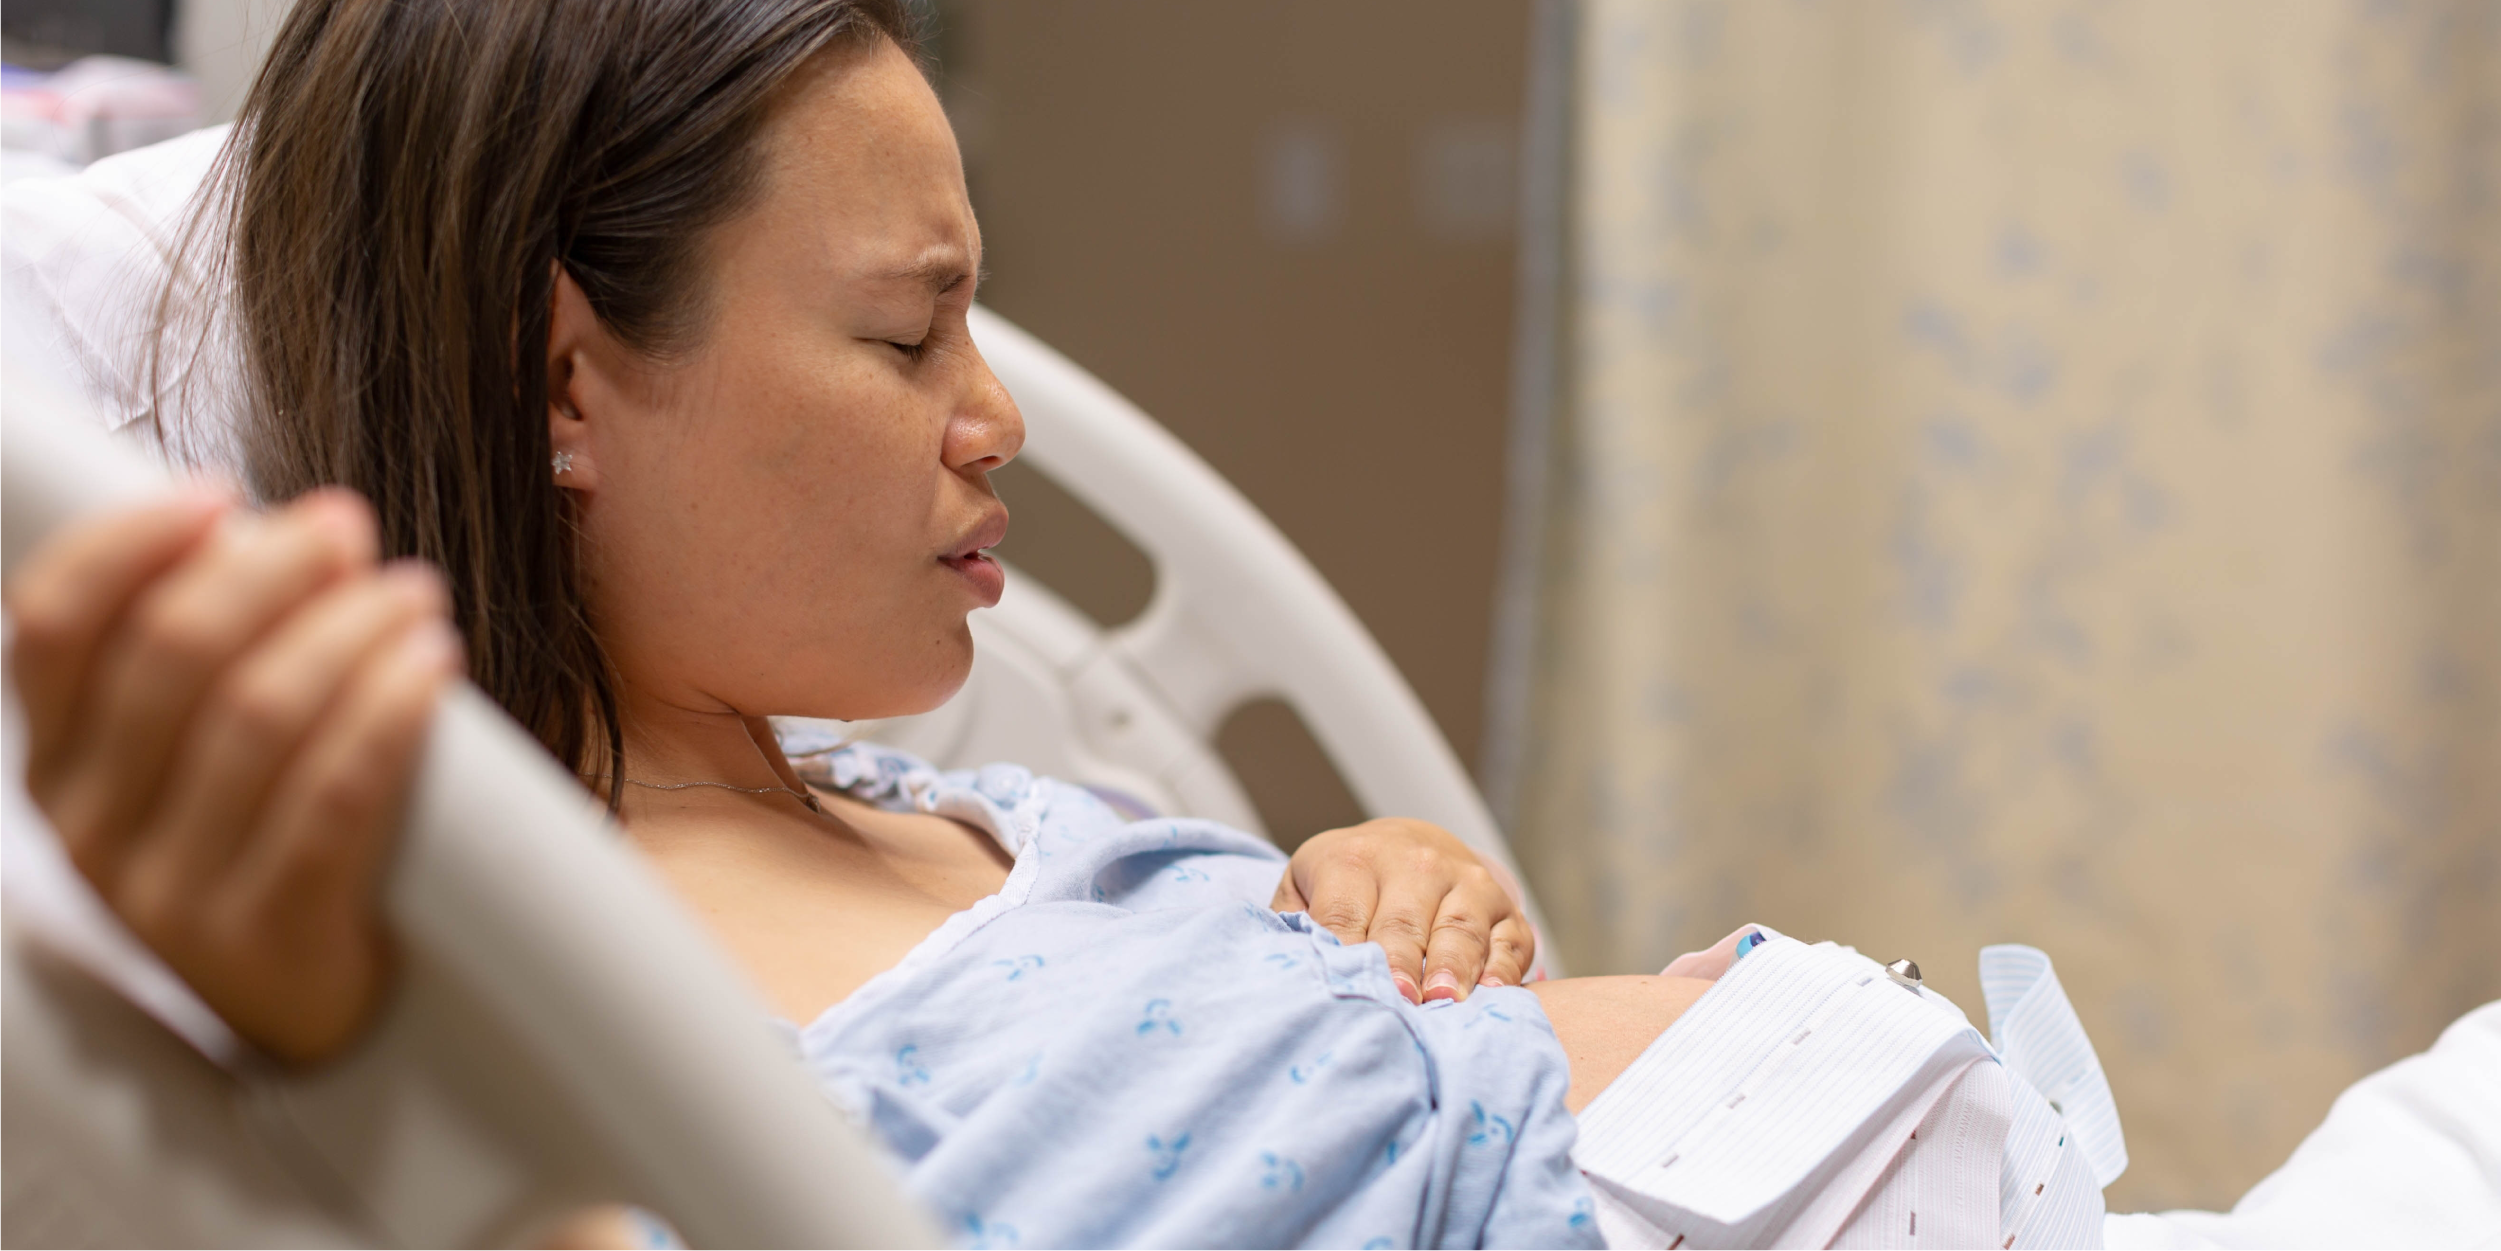 Pain relief options in labour